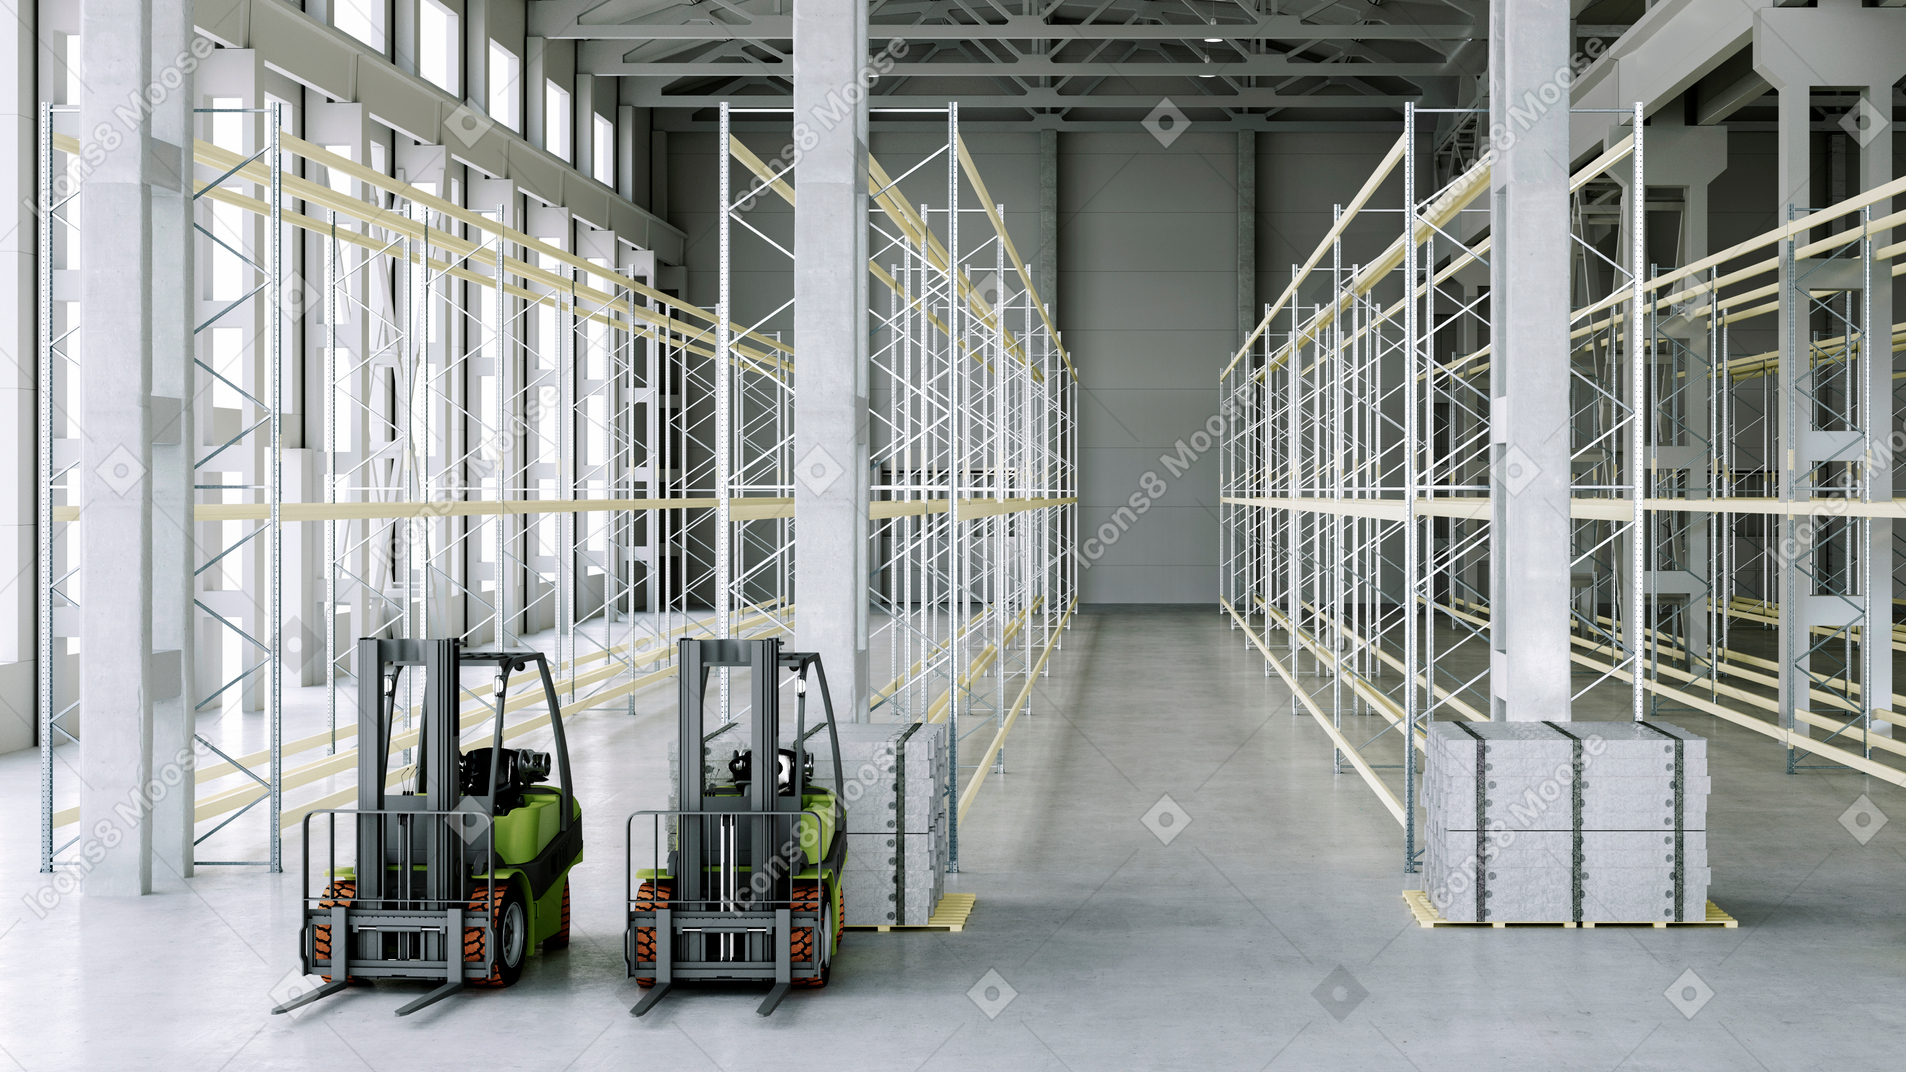 High-bay warehouse with two forklifts